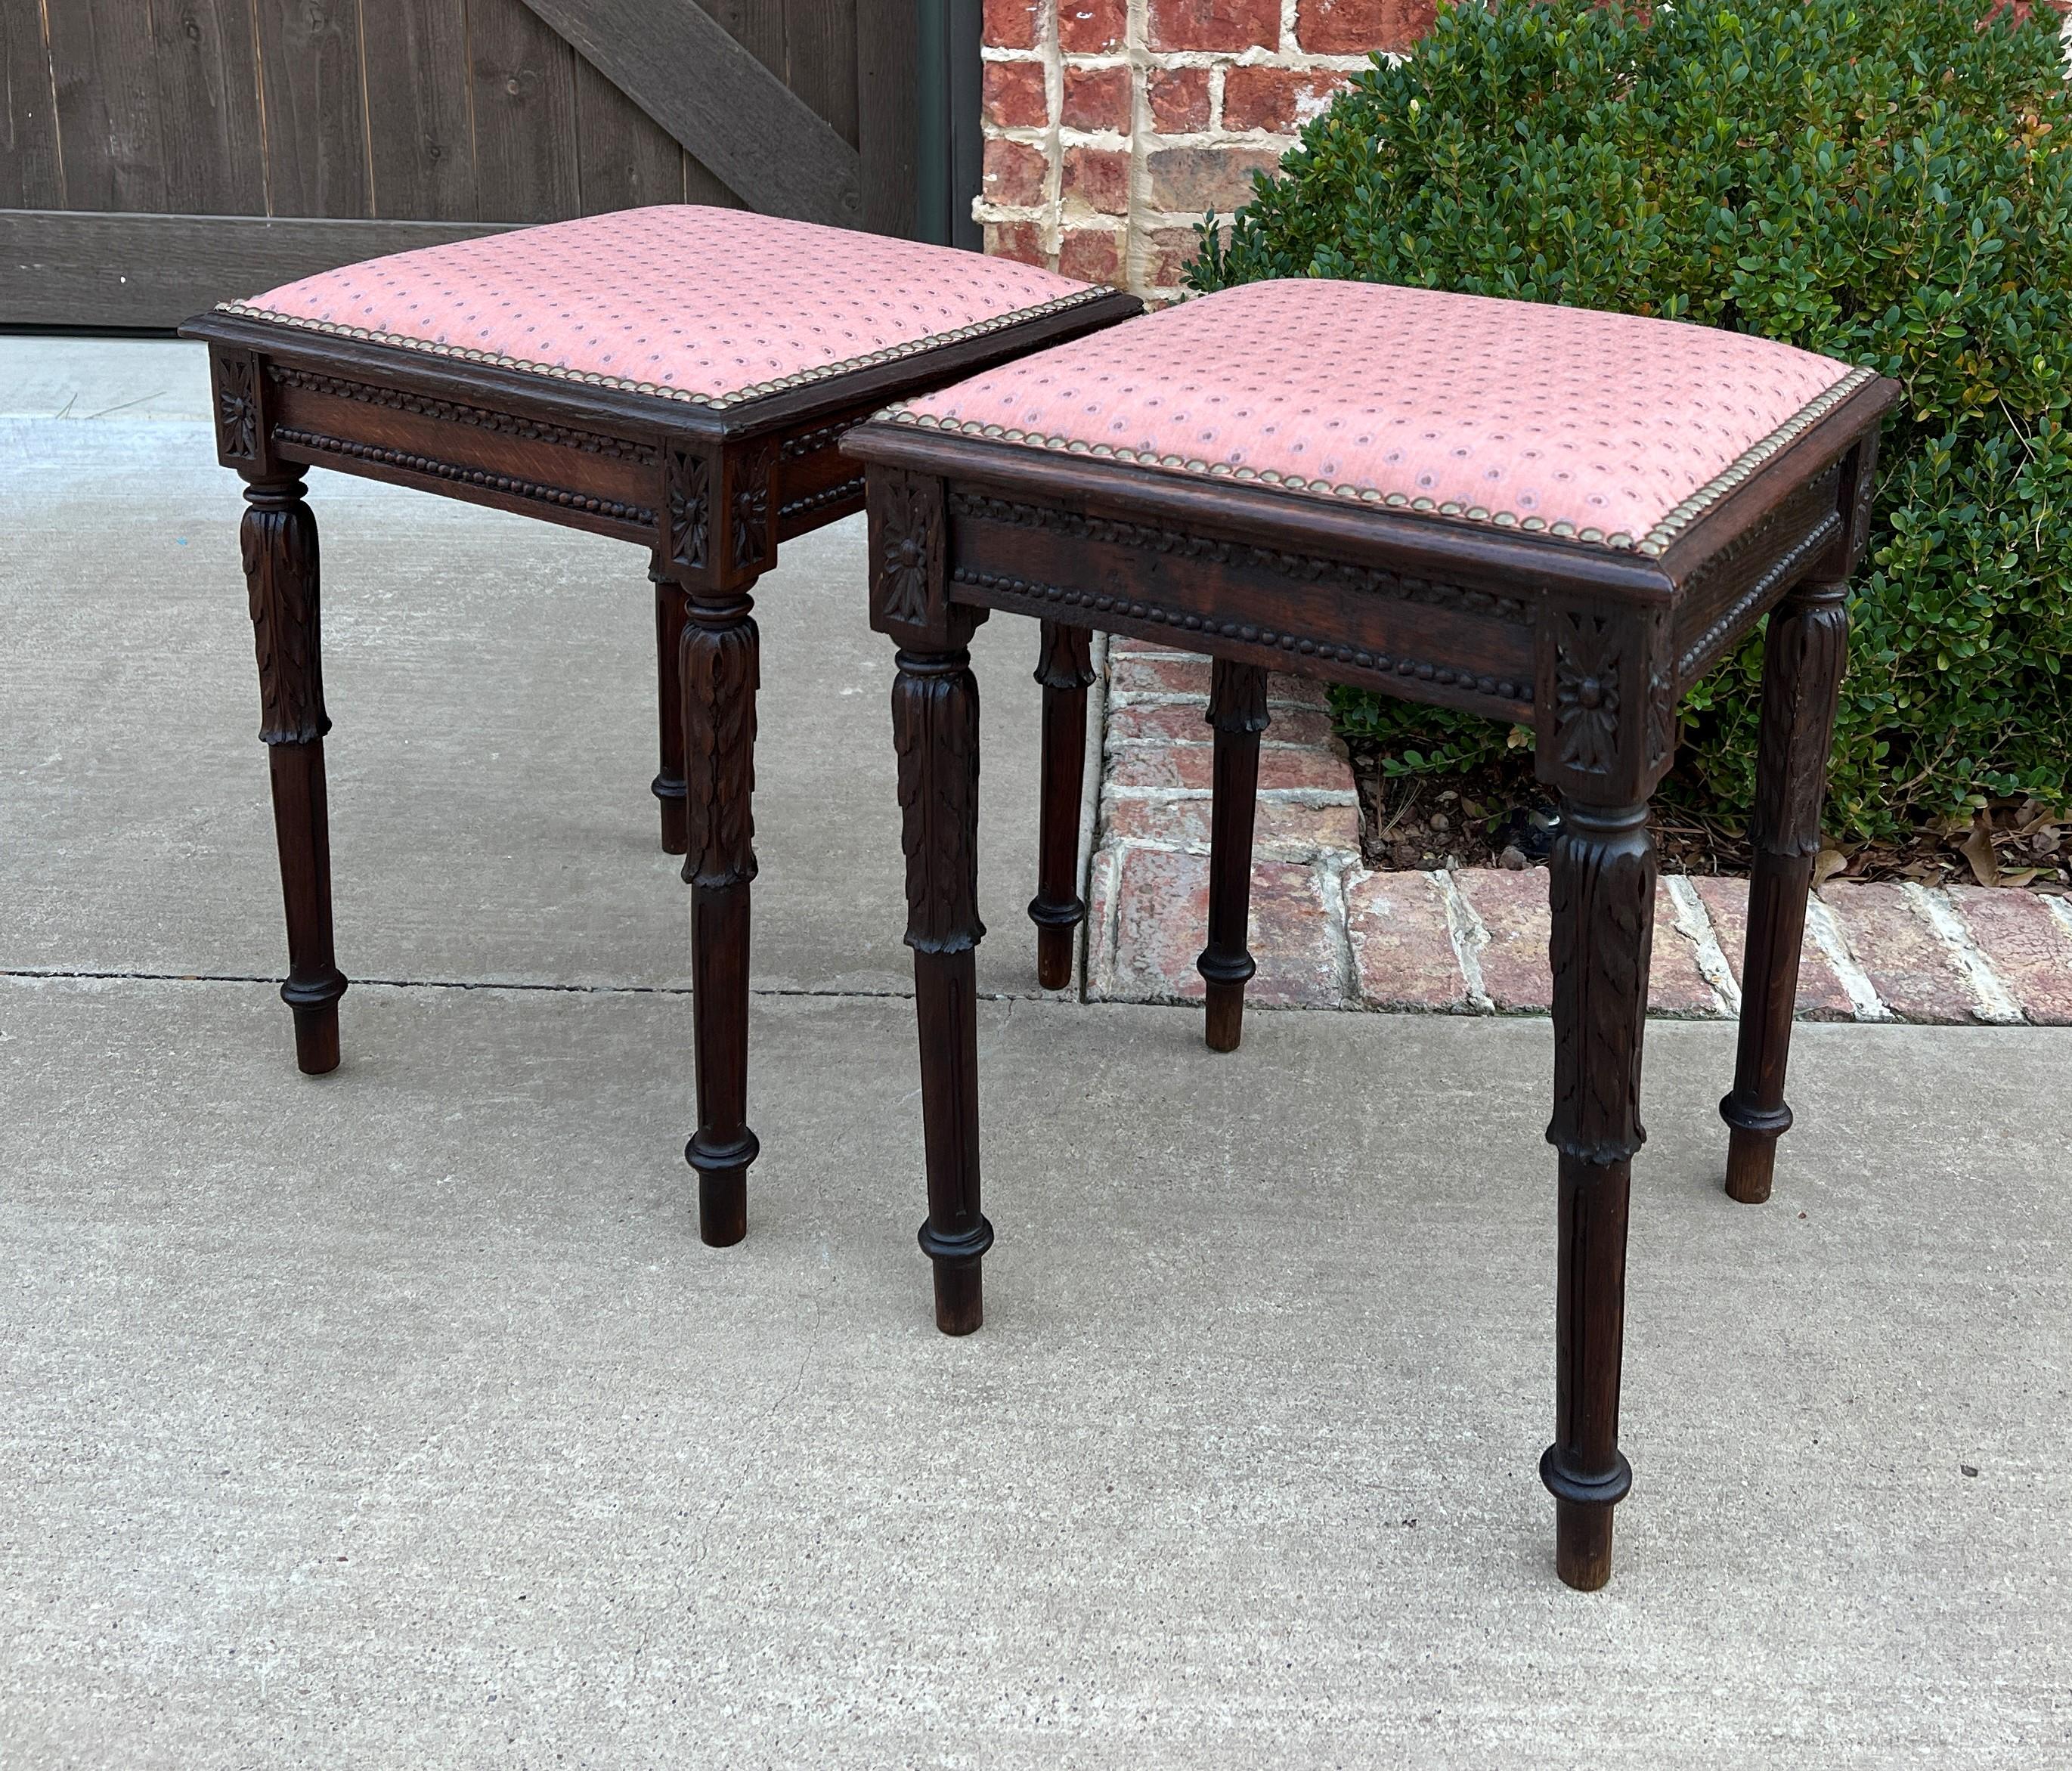 CHARMING Antique Pair of French Oak Stools, Footstools, or  Small Benched with Upholstered Tops~~c. 1890s

Classic French flair carved oak decorator pieces with upholstered seats with brass nail head tacks~~nicely carved oak skirts and